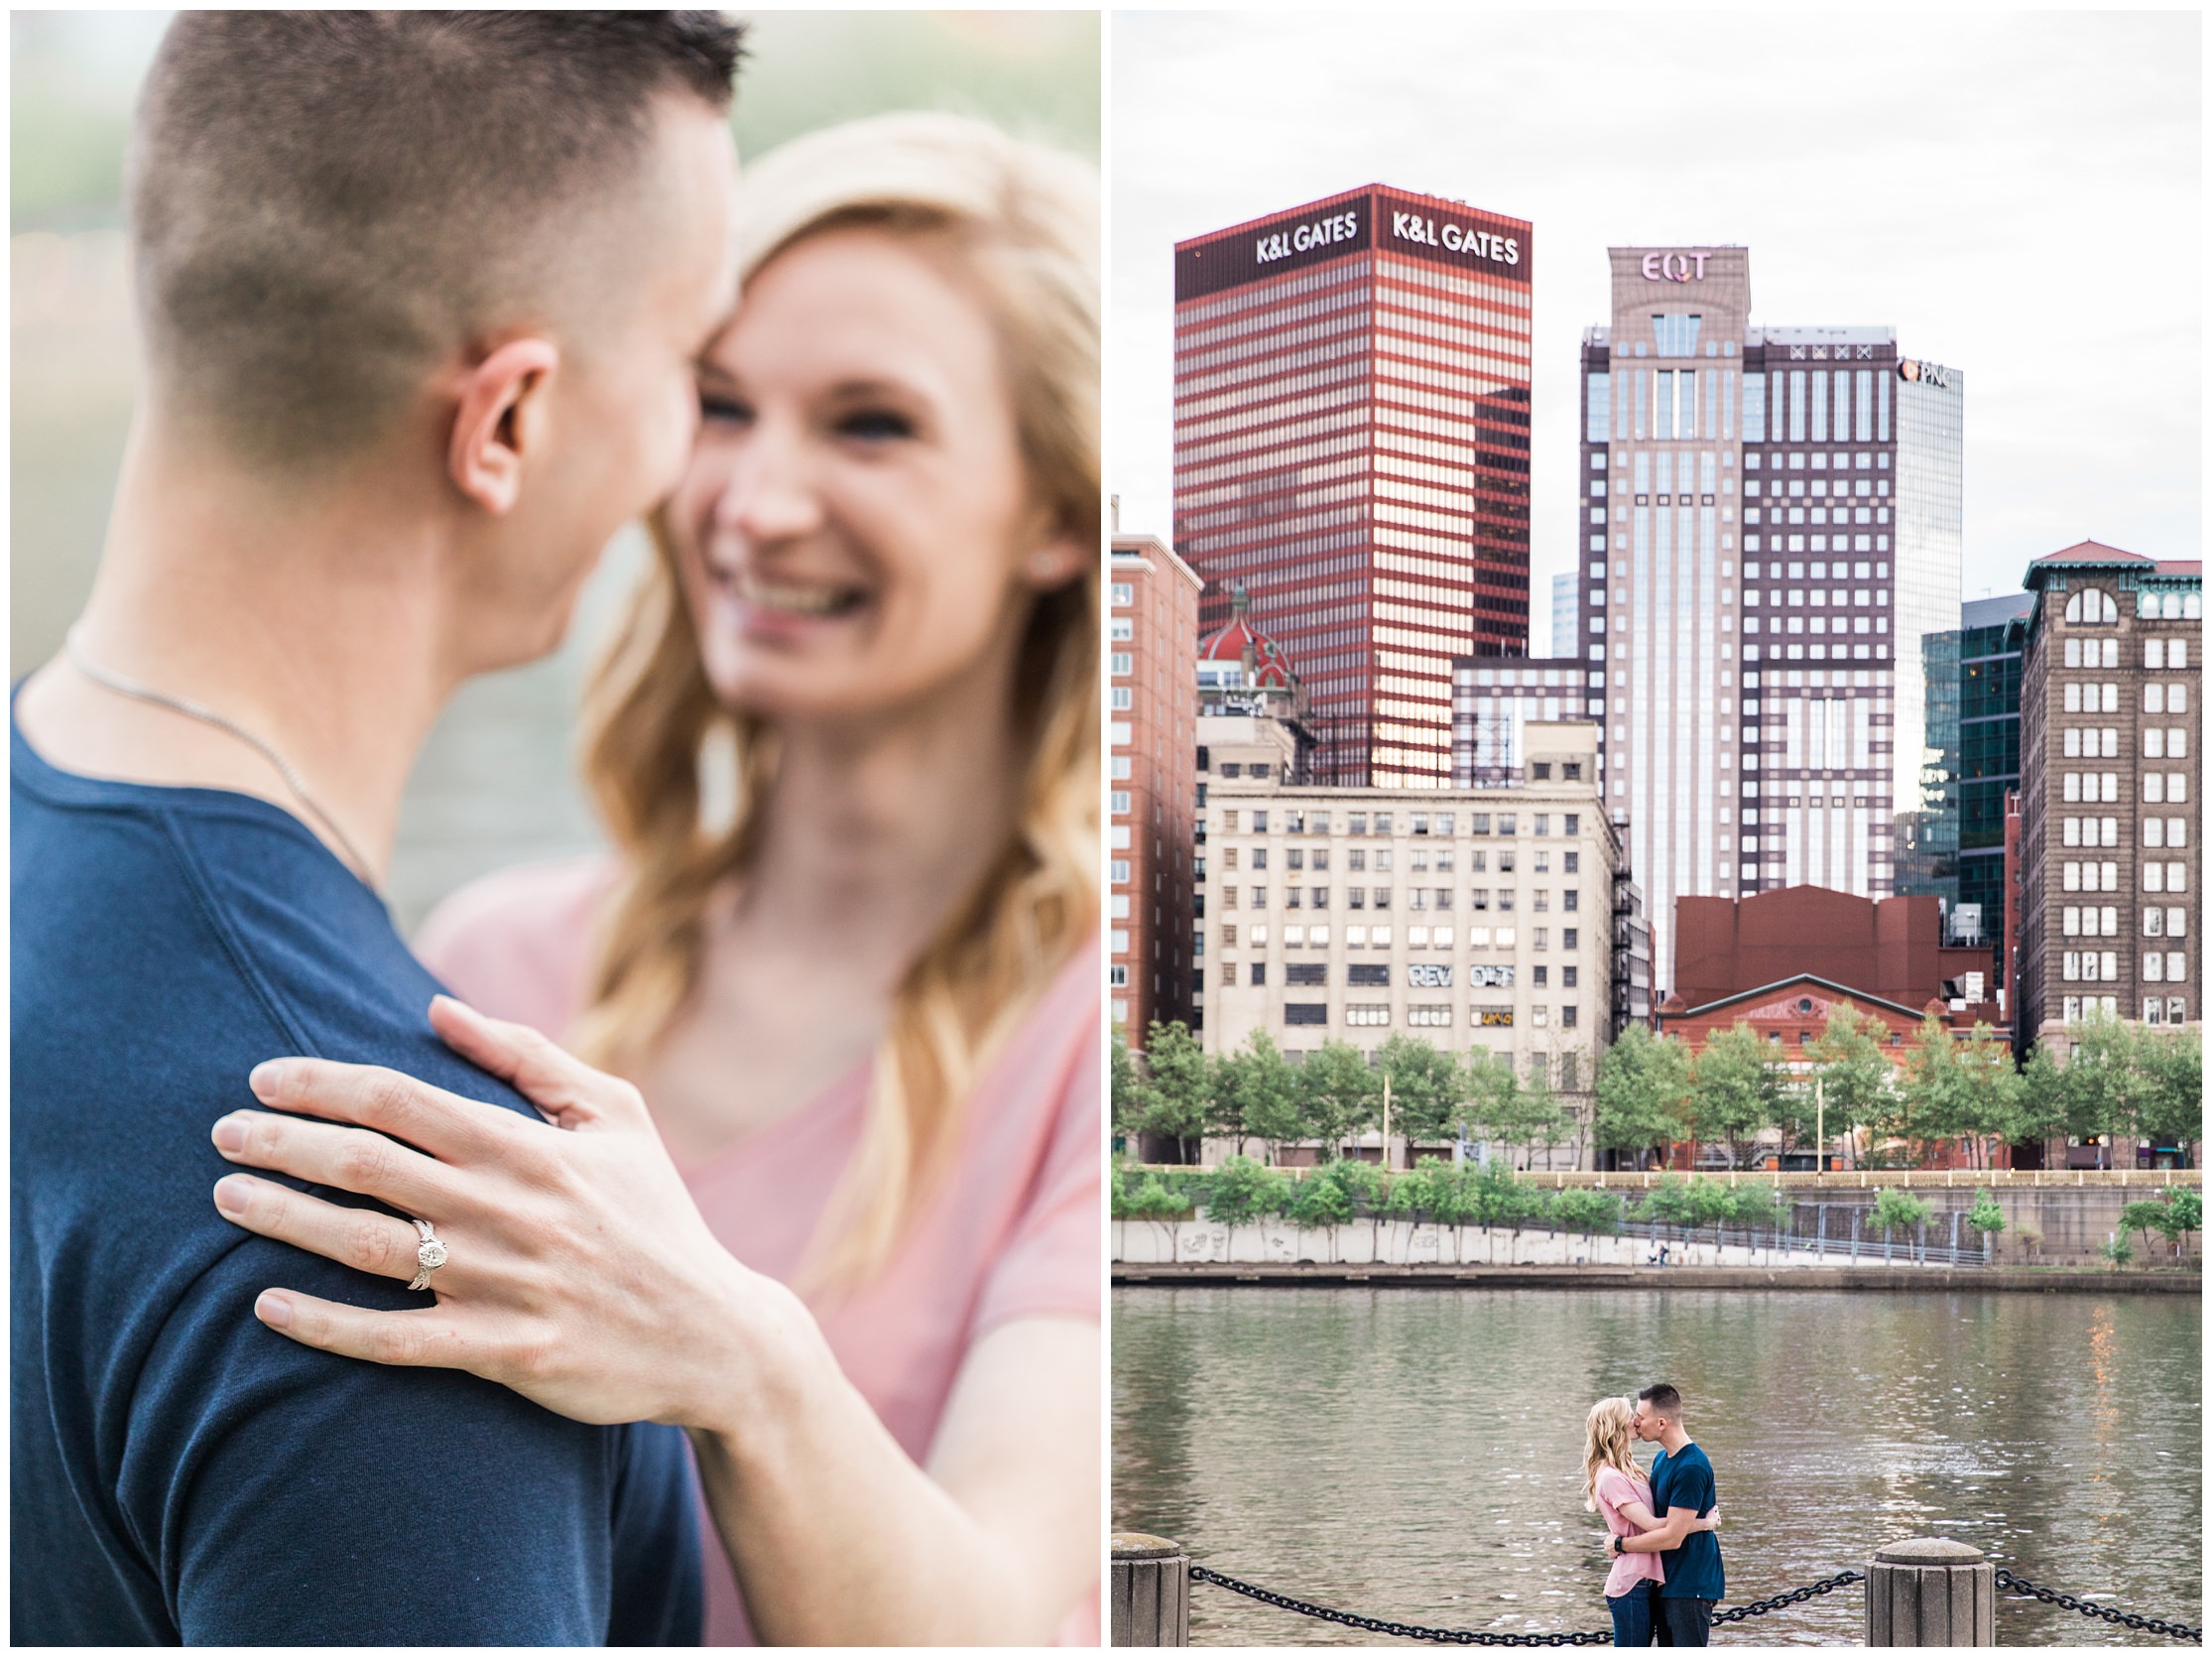 light and airy pittsburgh engagement session, light and airy wedding photography, pittsburgh engagement photographer, pittsburgh engagement photography, pittsburgh engagement, pittsburgh wedding photographer, pittsburgh wedding photography, pittsburgh wedding, pittsburgh north shore, pittsburgh skyline, pittsburgh couple, engagement photo, engagement photography,